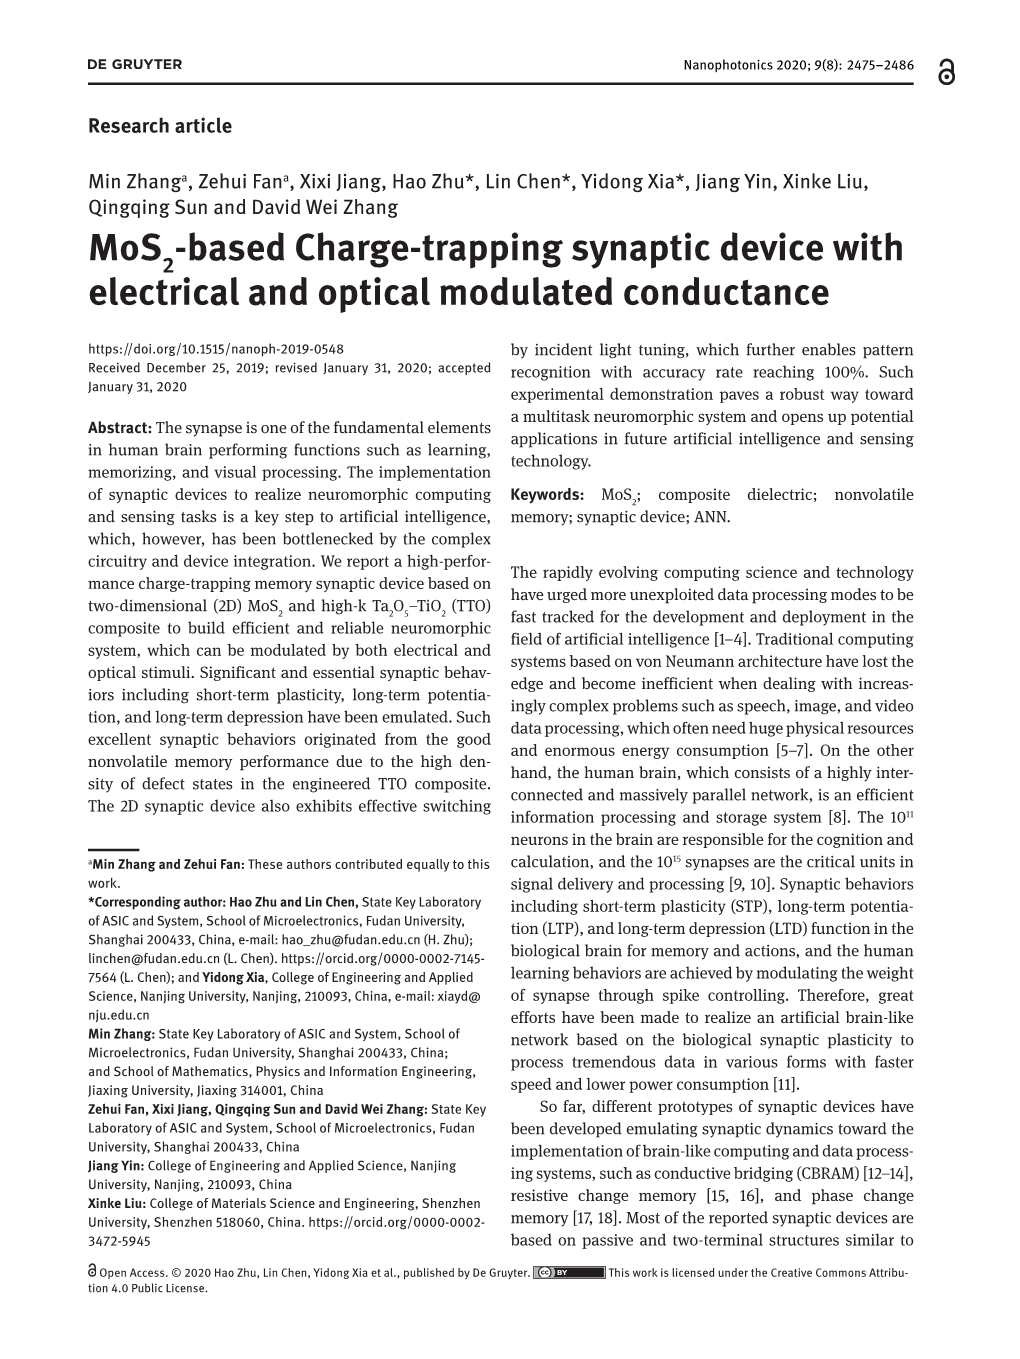 Mos -Based Charge-Trapping Synaptic Device with Electrical and Optical